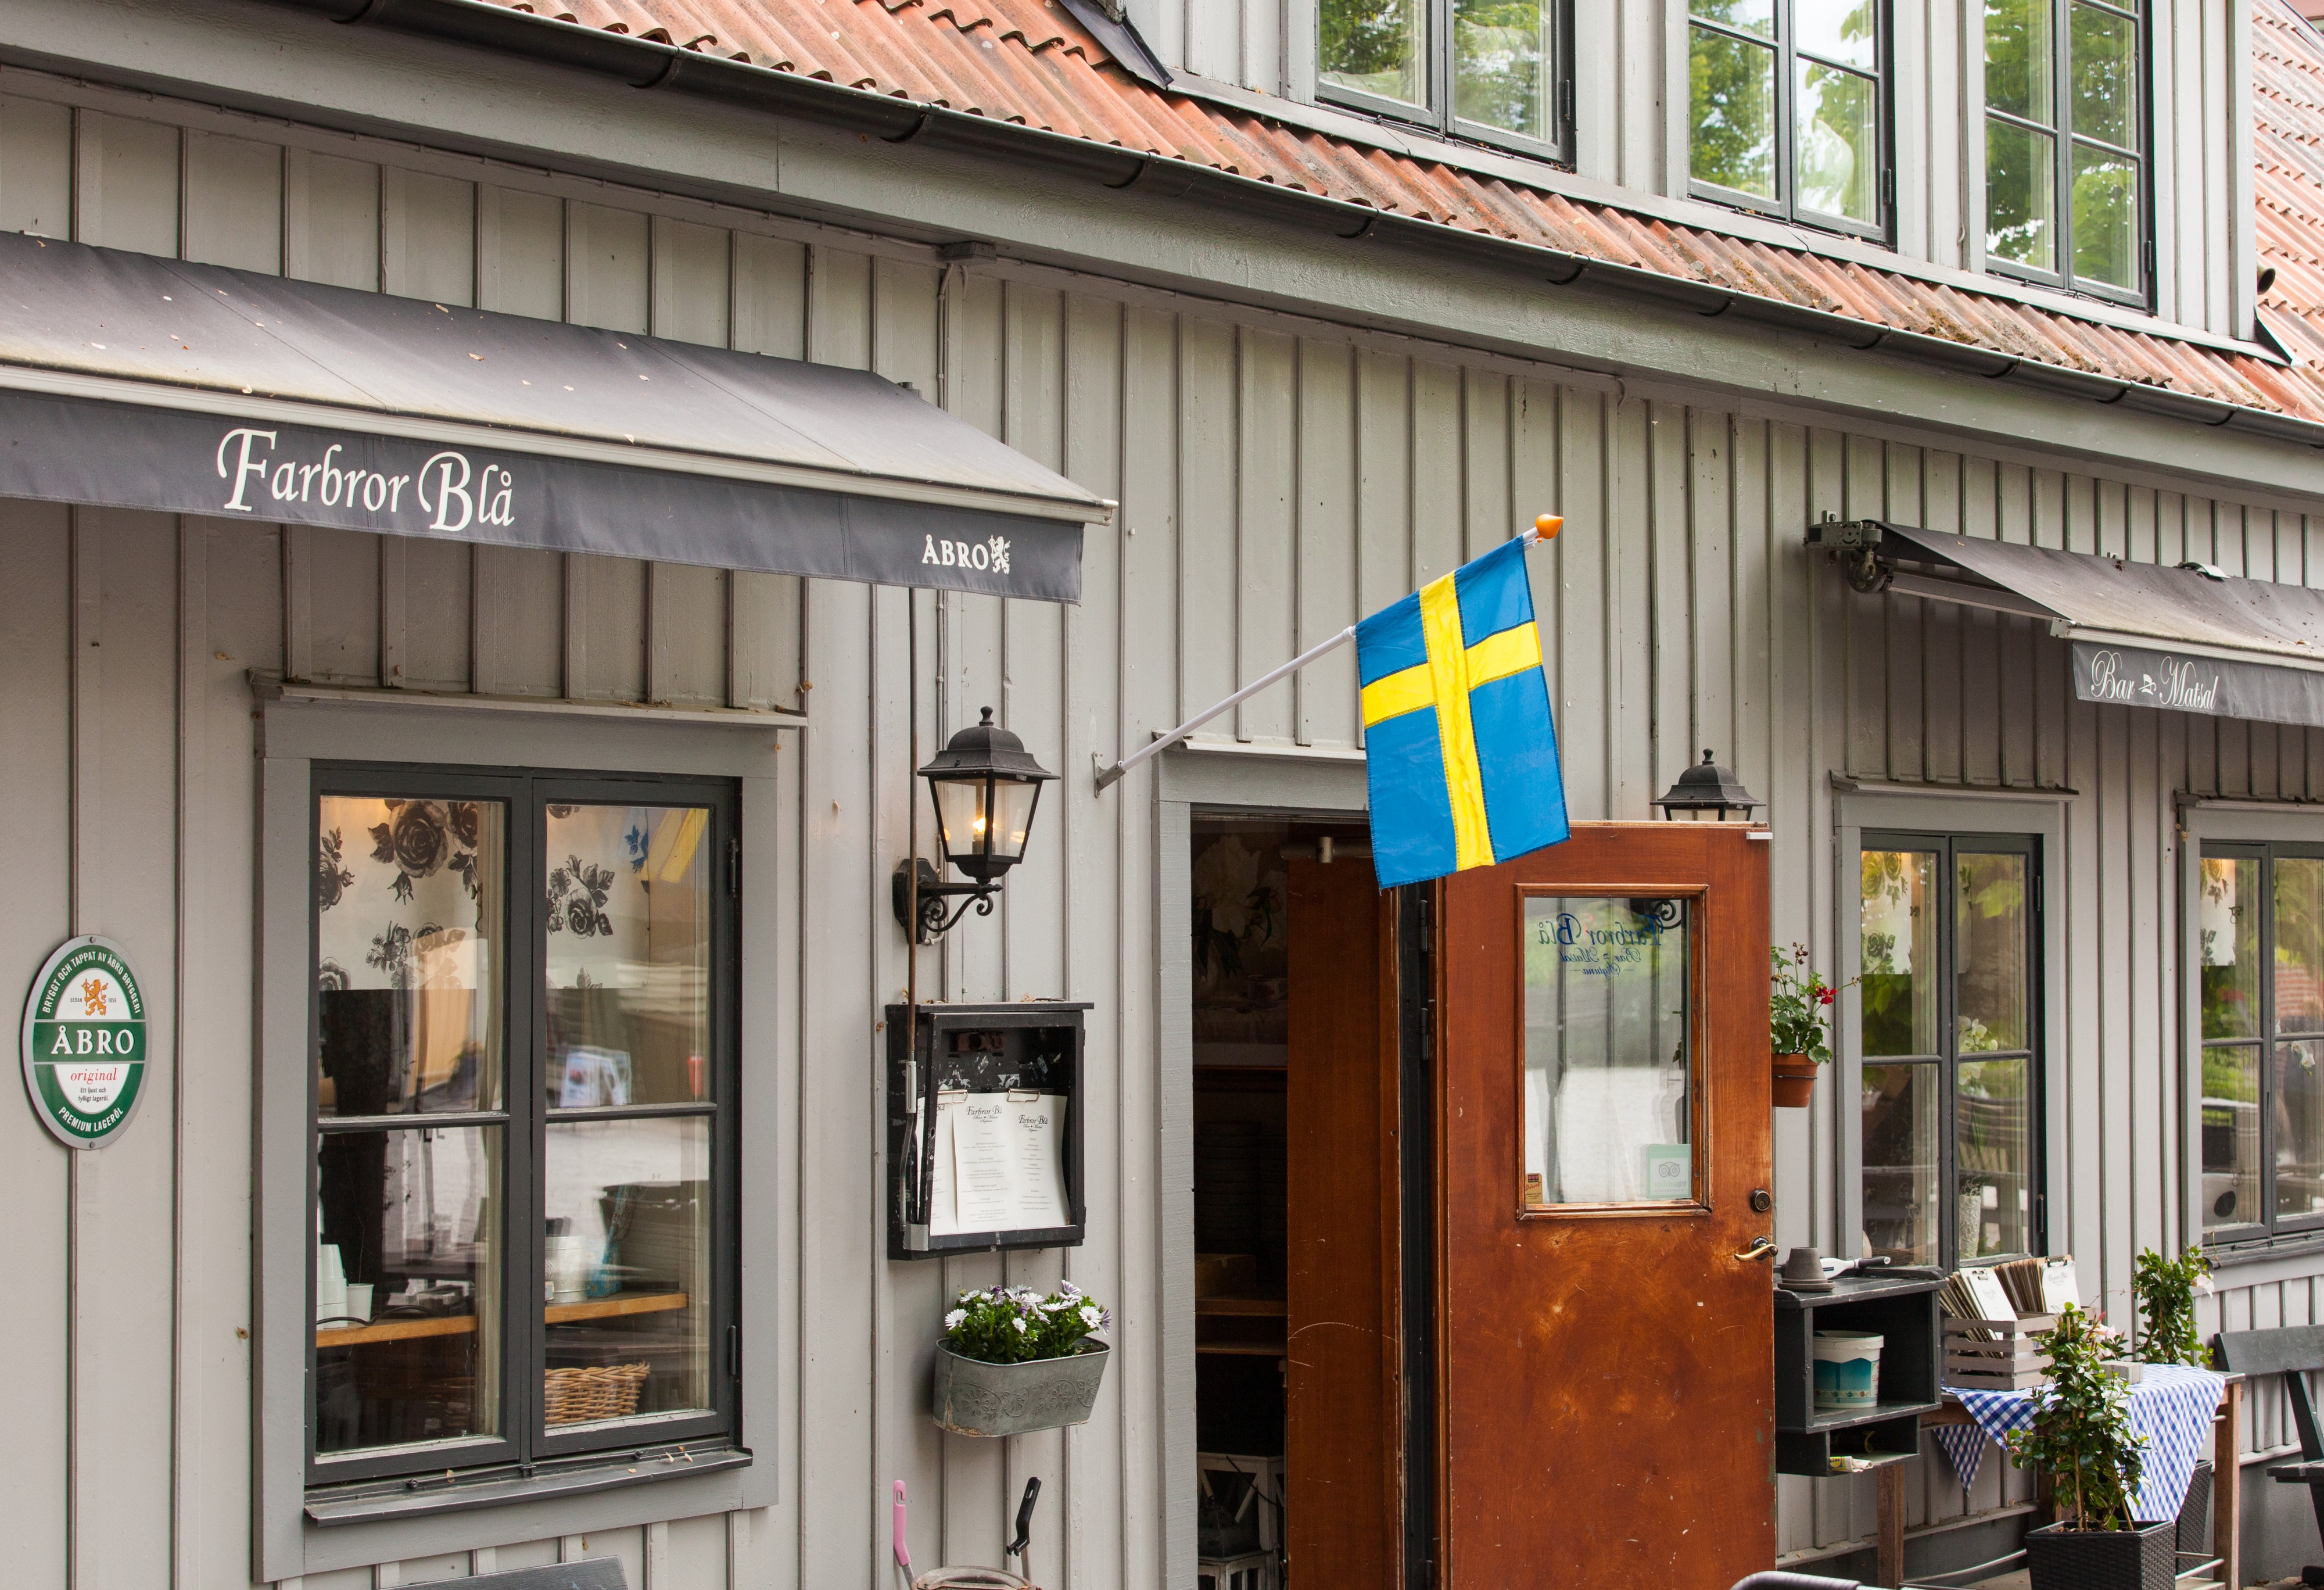 Sigtuna town, Sweden, June 2014, picture 5